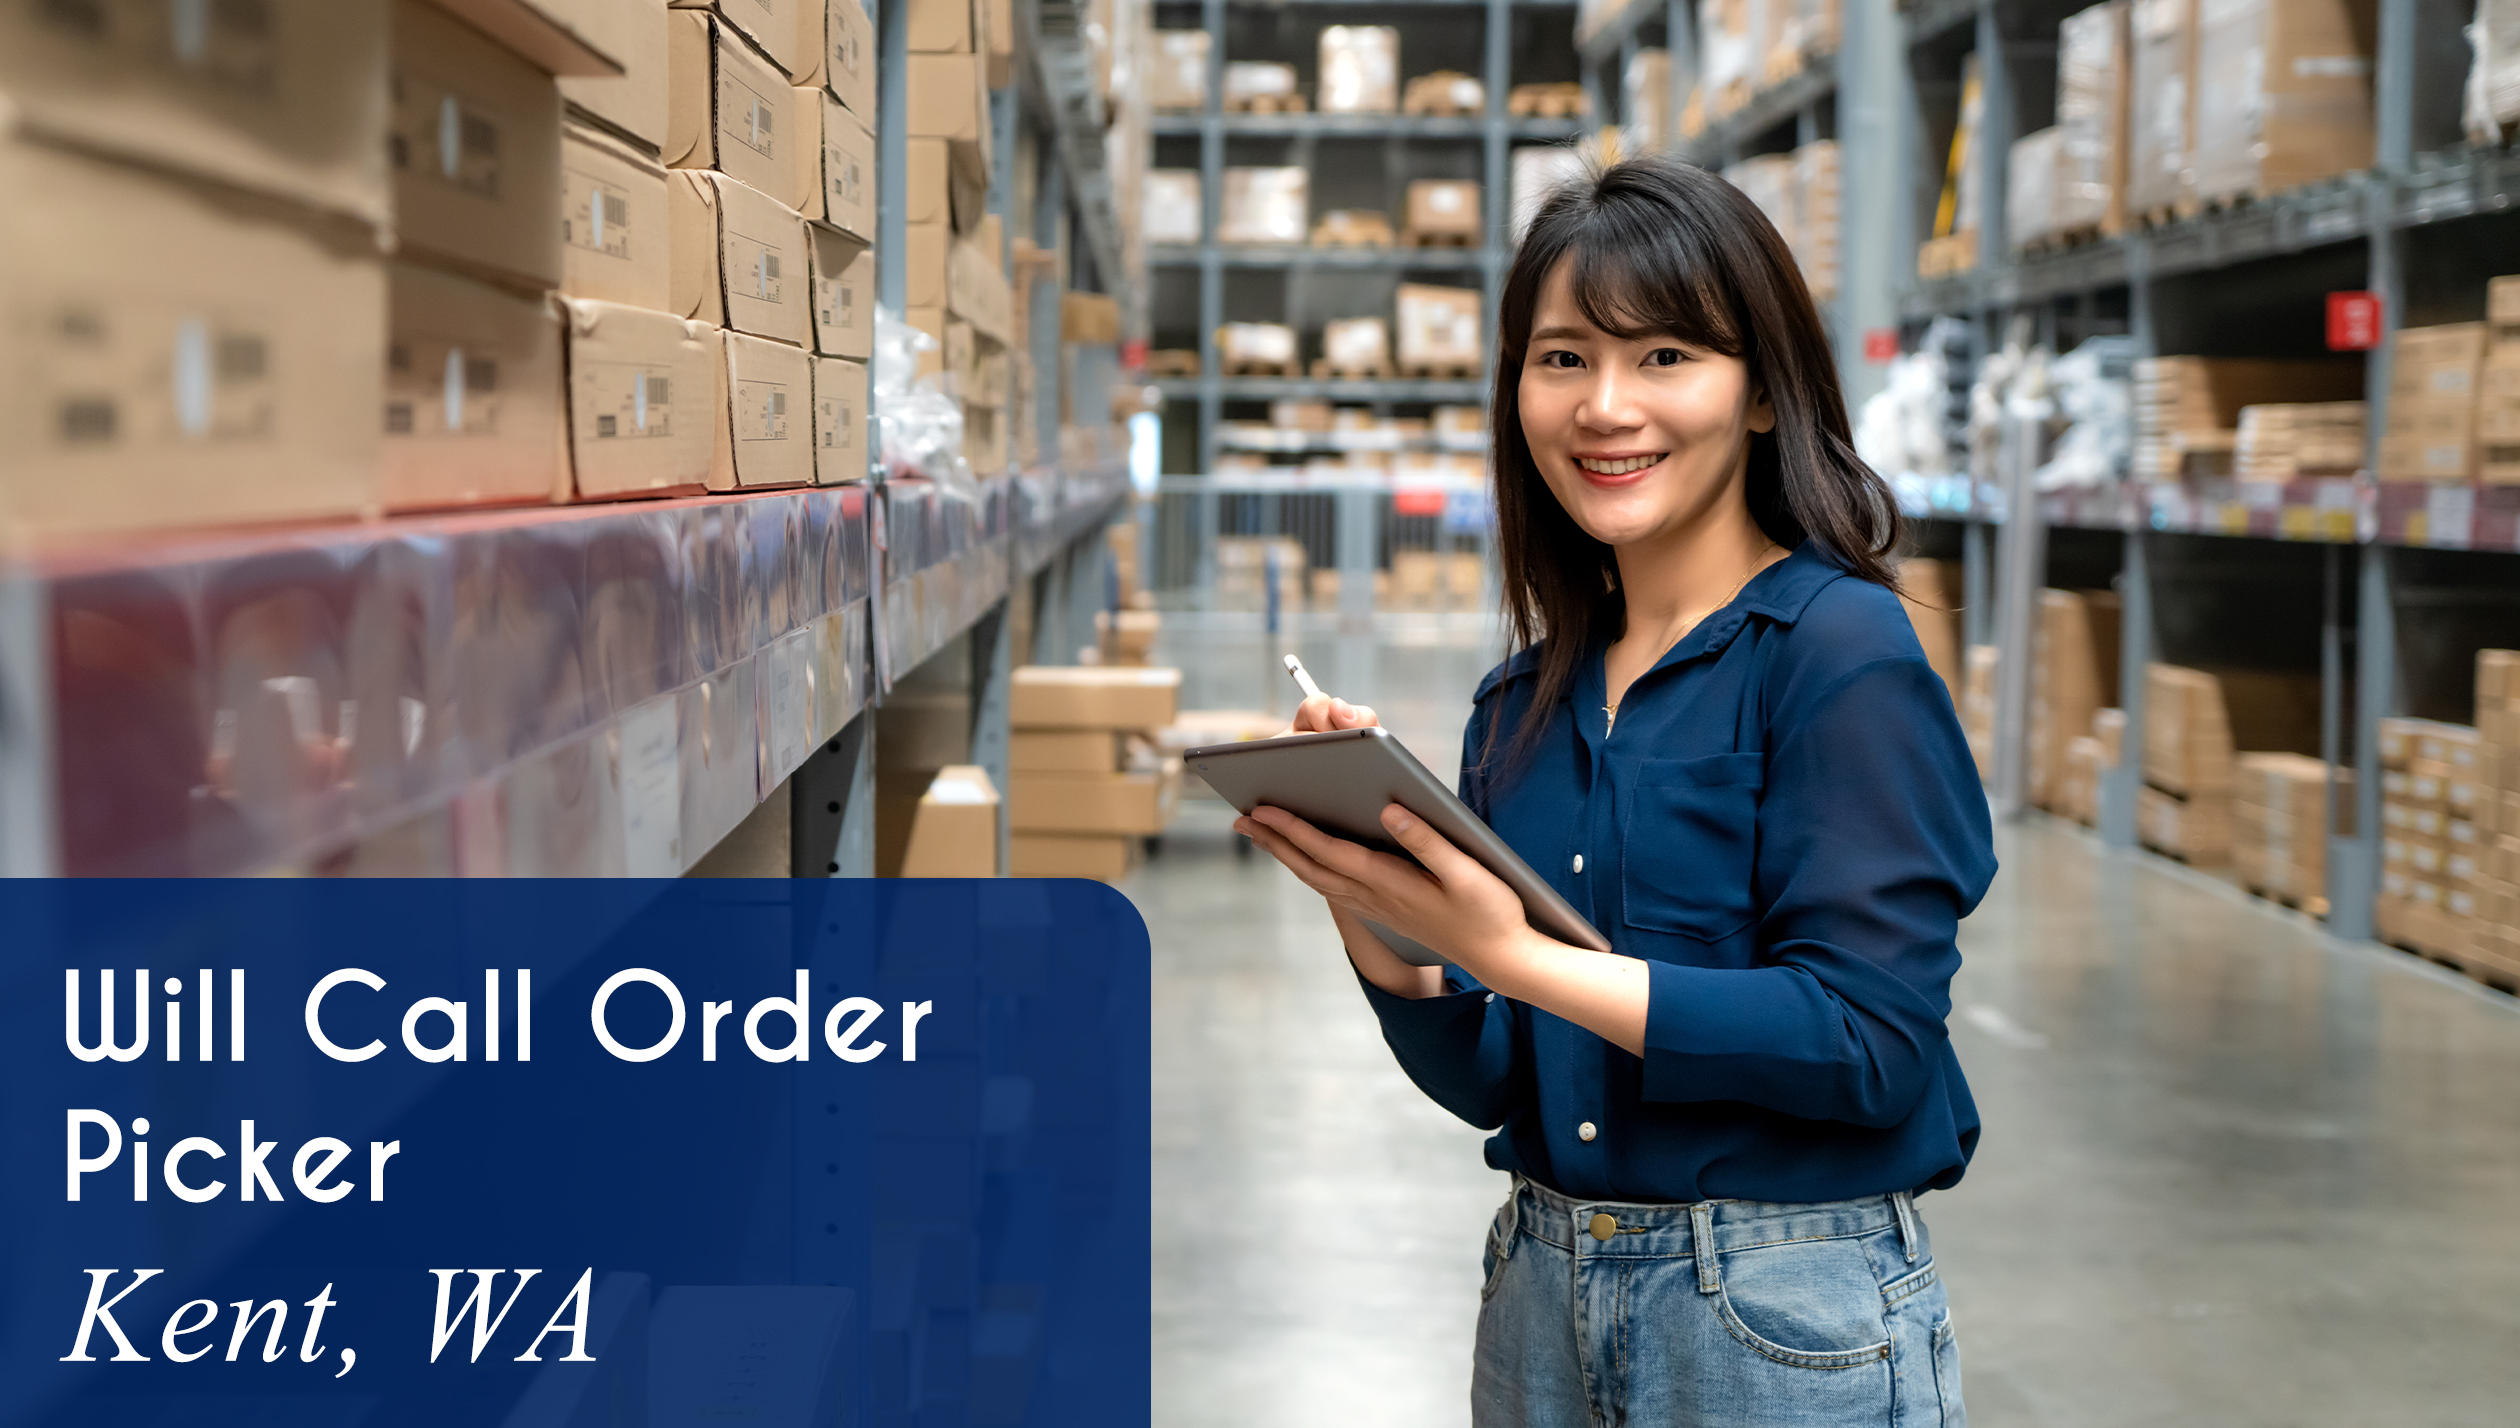 Now Hiring a Will Call Order Picker in Kent, WA